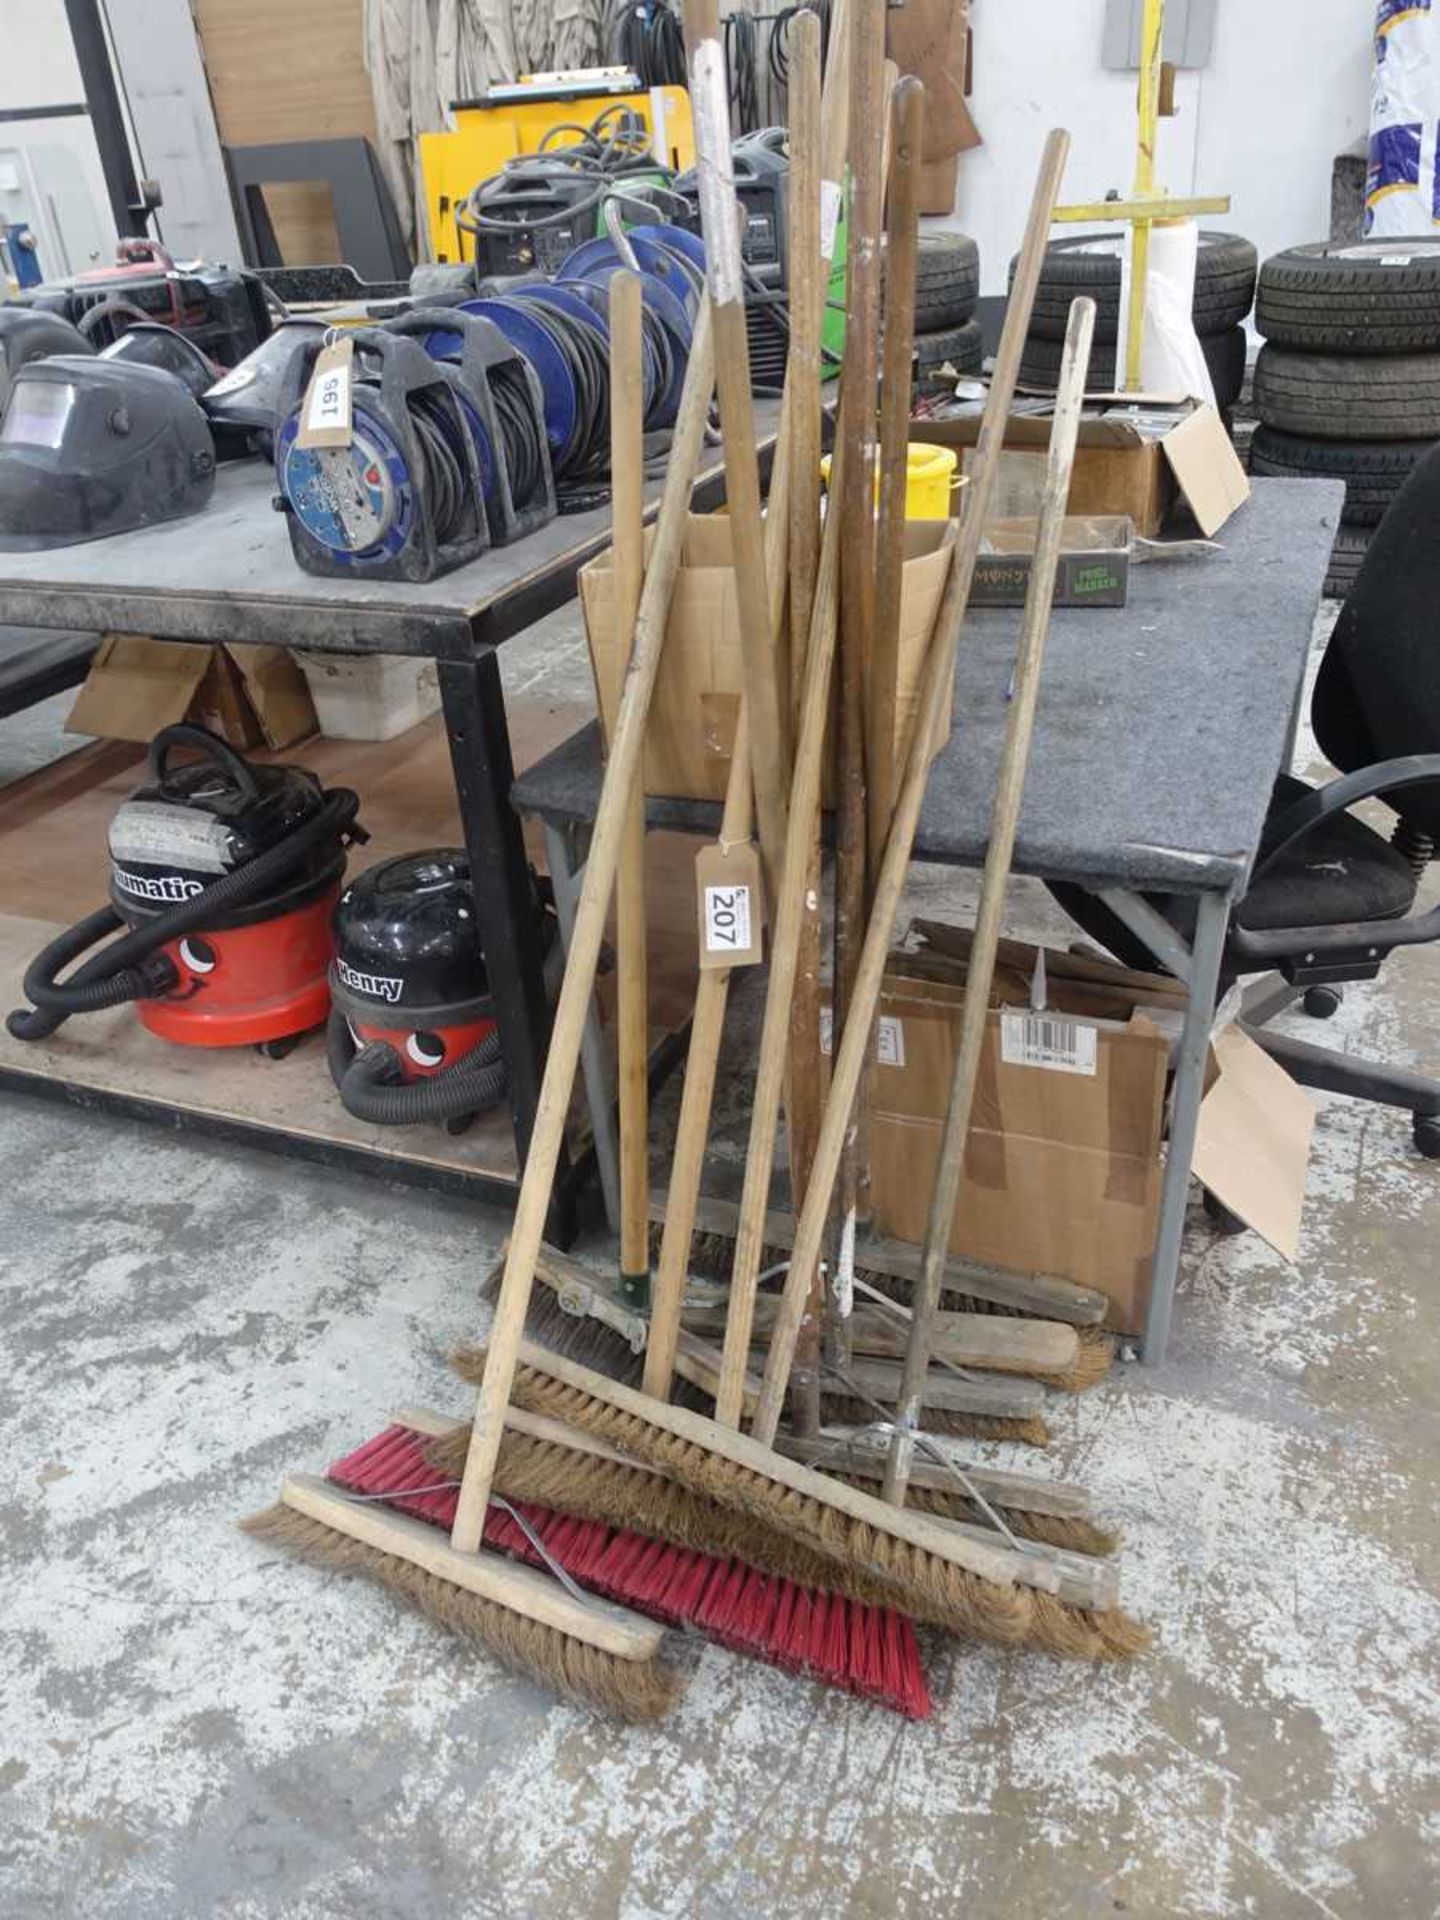 +VAT Quantity of brooms together with Henry and Numatic vacuum cleaners